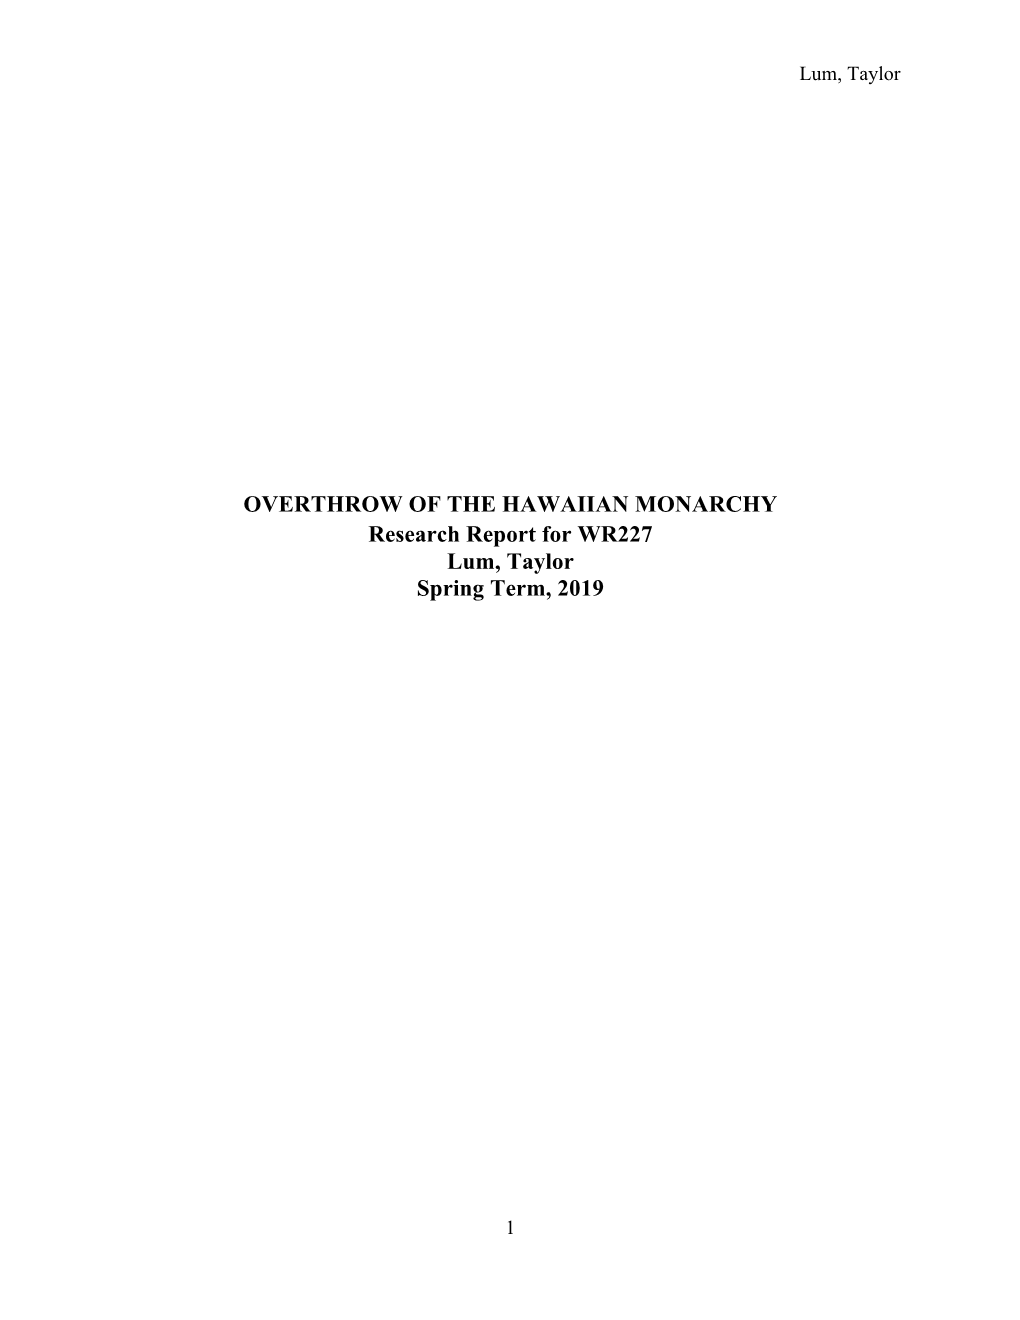 OVERTHROW of the HAWAIIAN MONARCHY Research Report for WR227 Lum, Taylor Spring Term, 2019